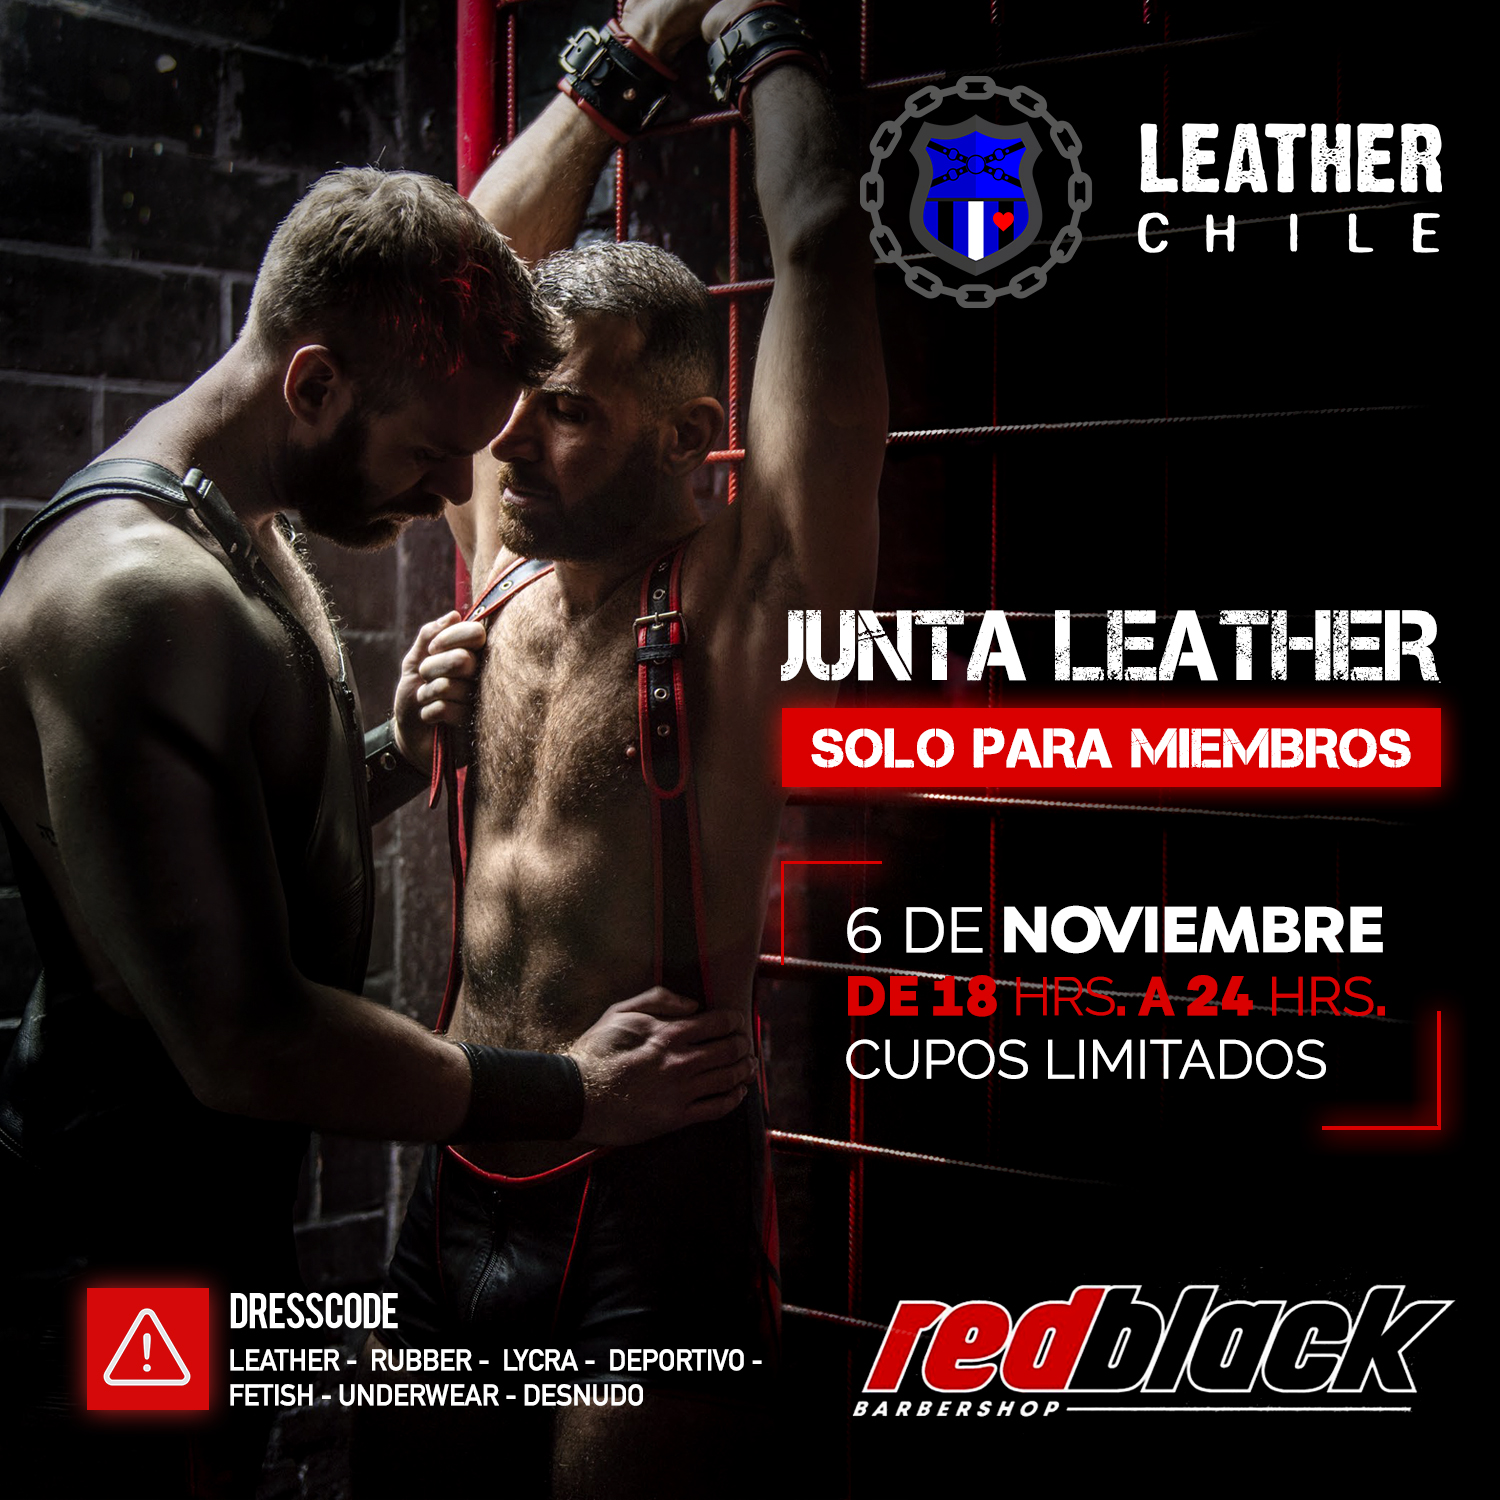 Leather Chile